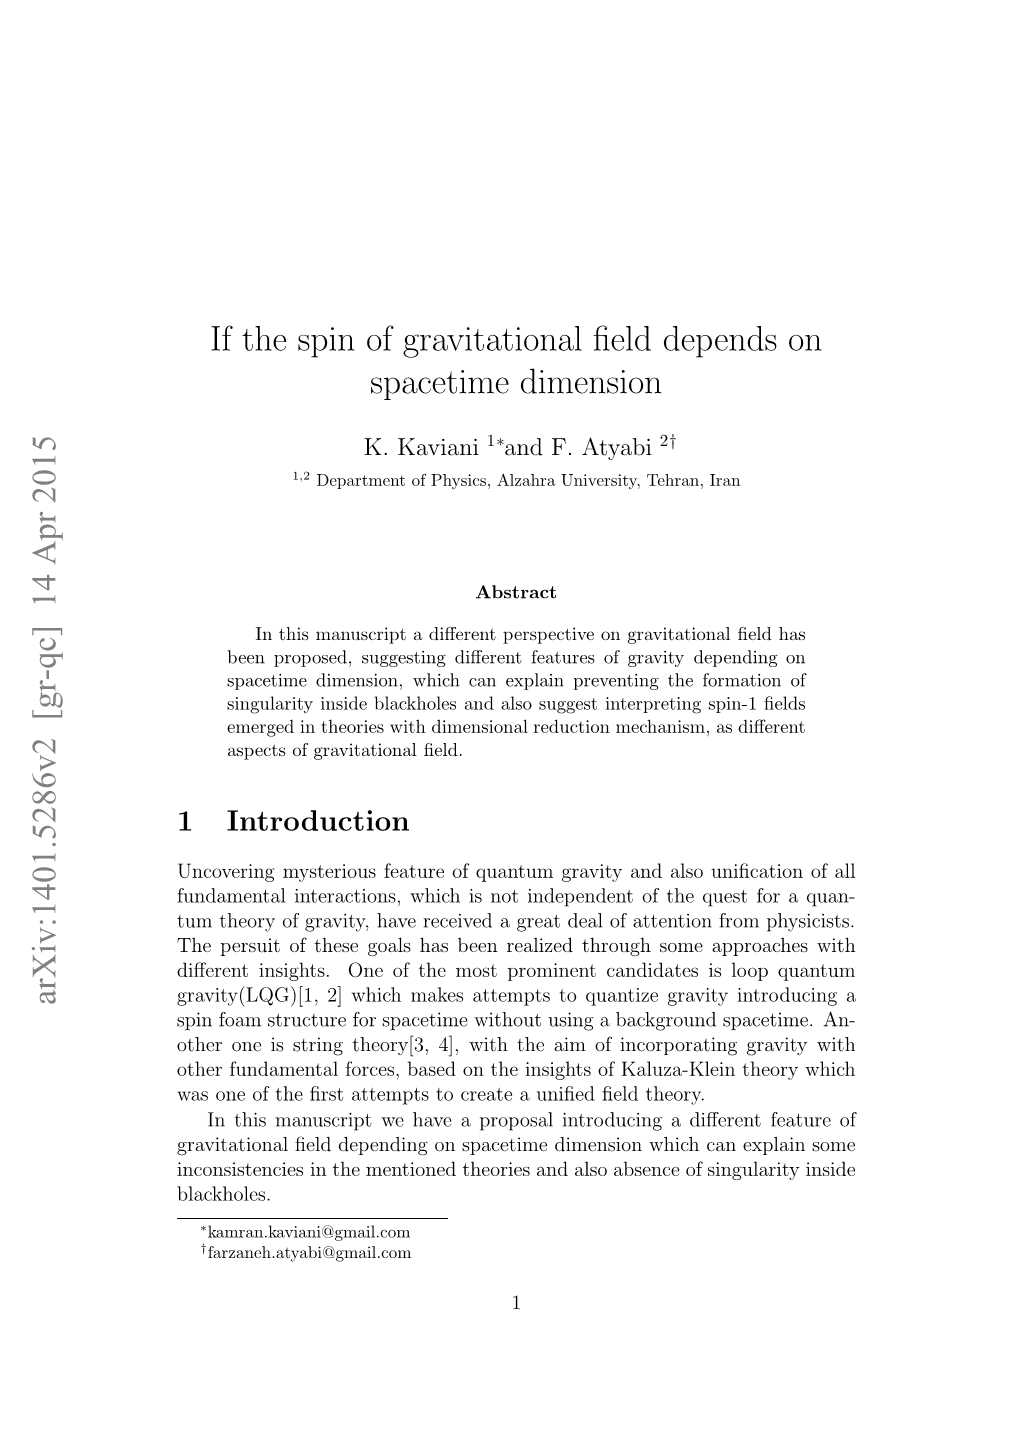 If the Spin of Gravitational Field Depends on Spacetime Dimension